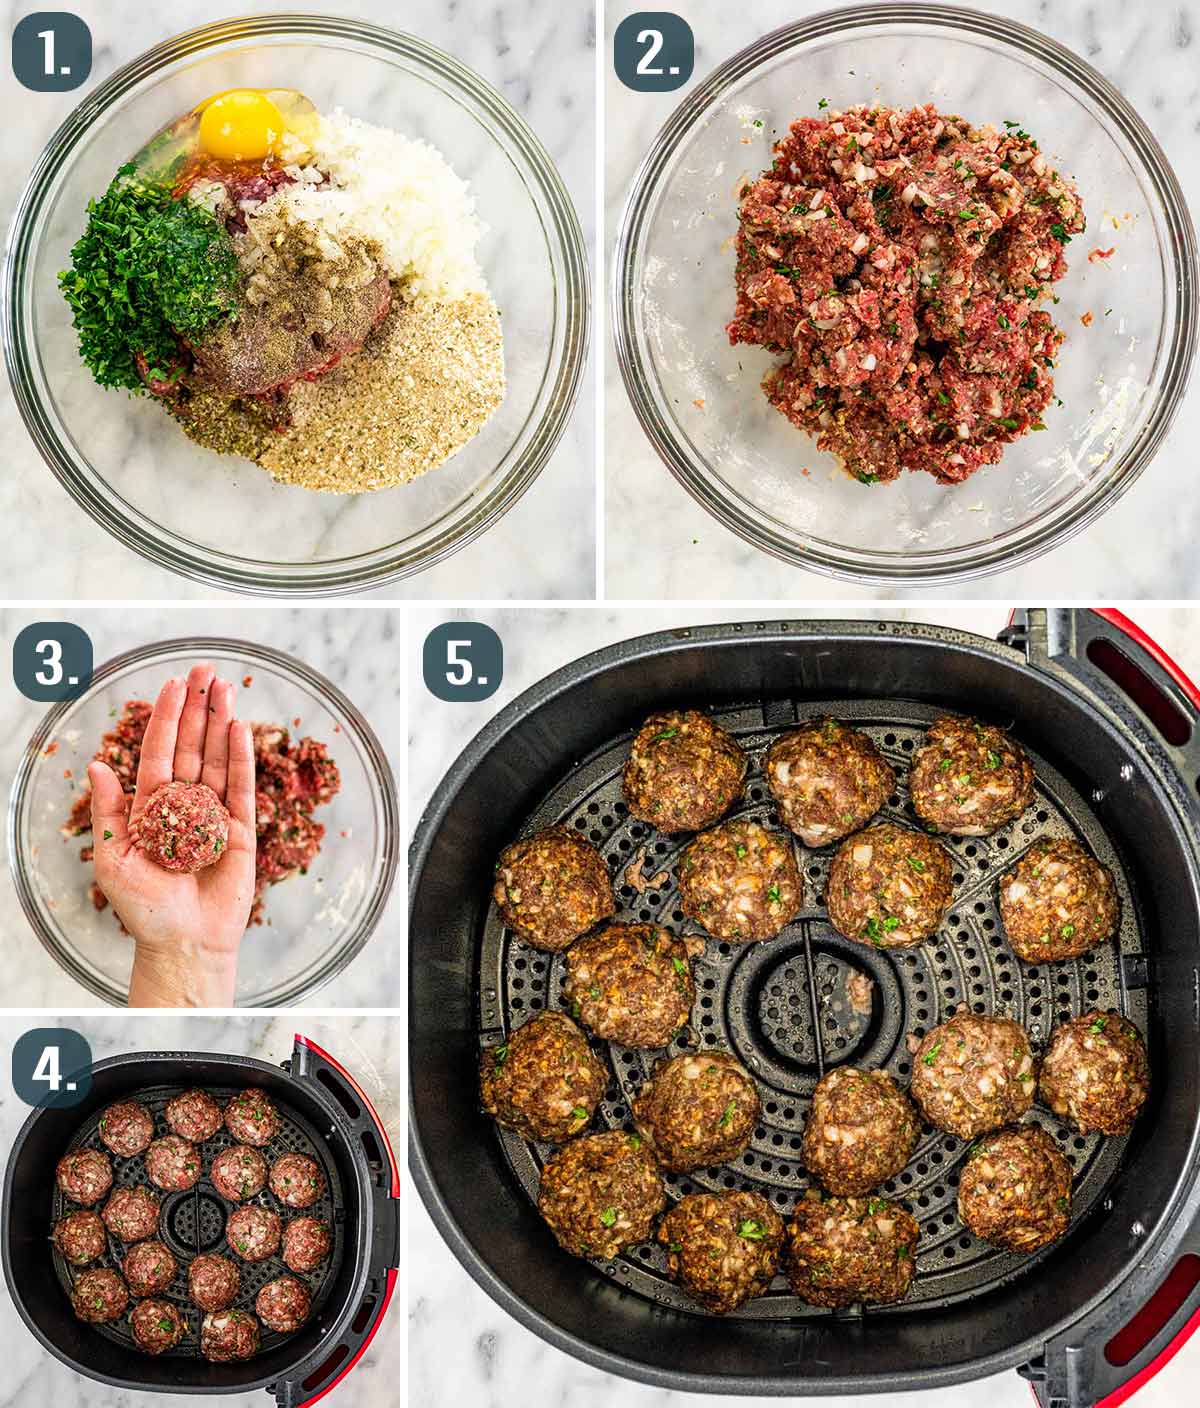 detailed process shots showing how to make meatballs and cook them in an air fryer.